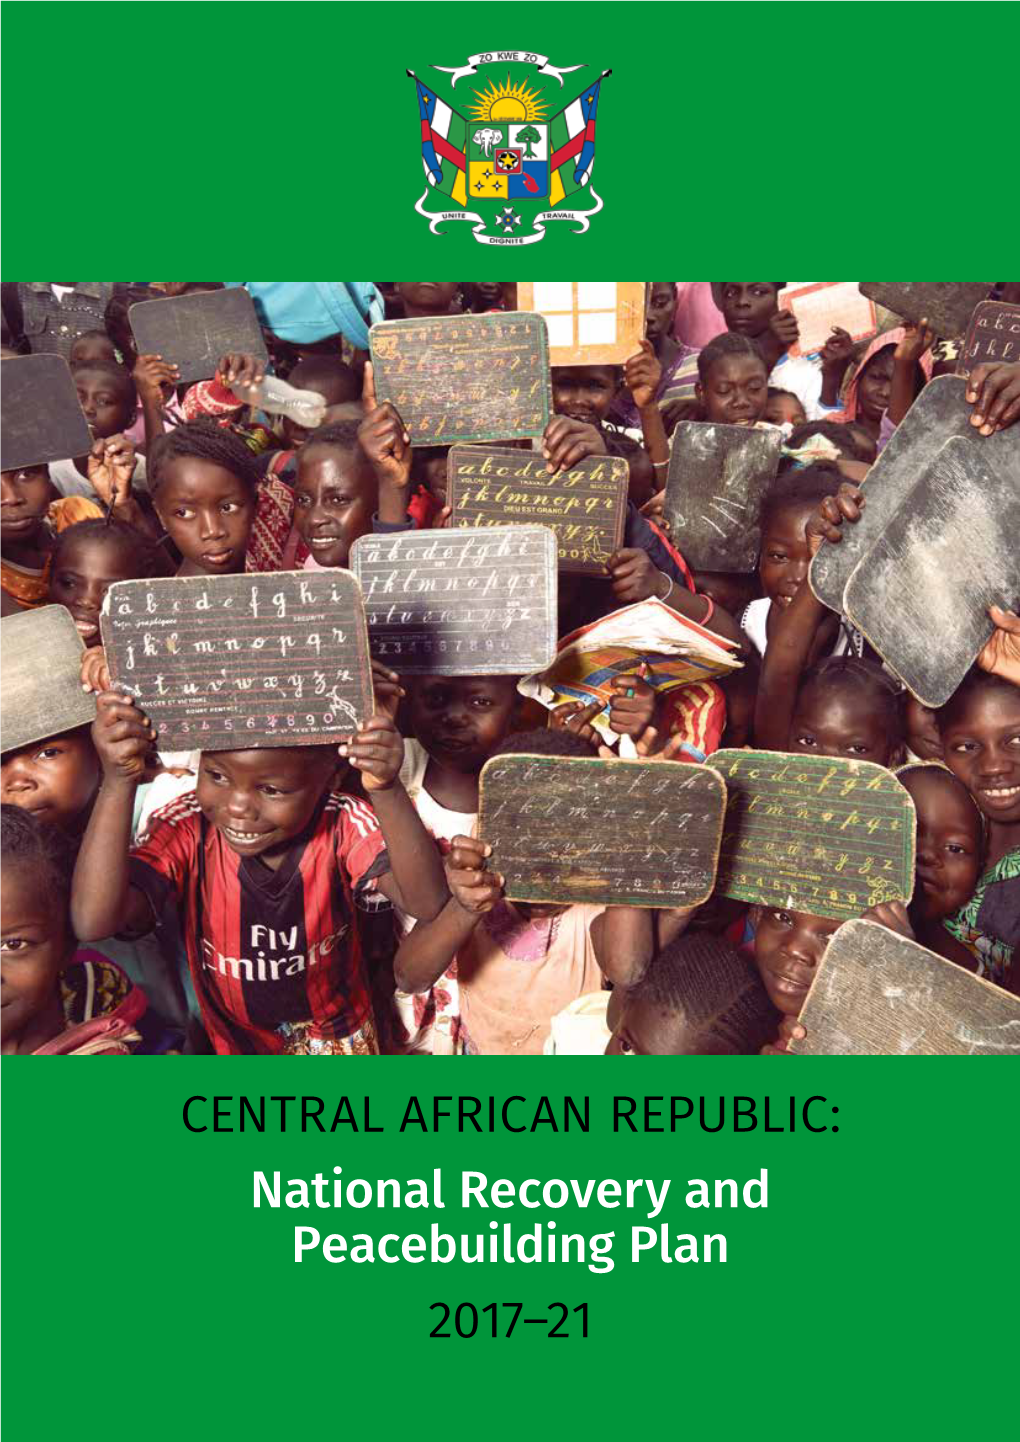 CENTRAL AFRICAN REPUBLIC: National Recovery and Peacebuilding Plan 2017–21